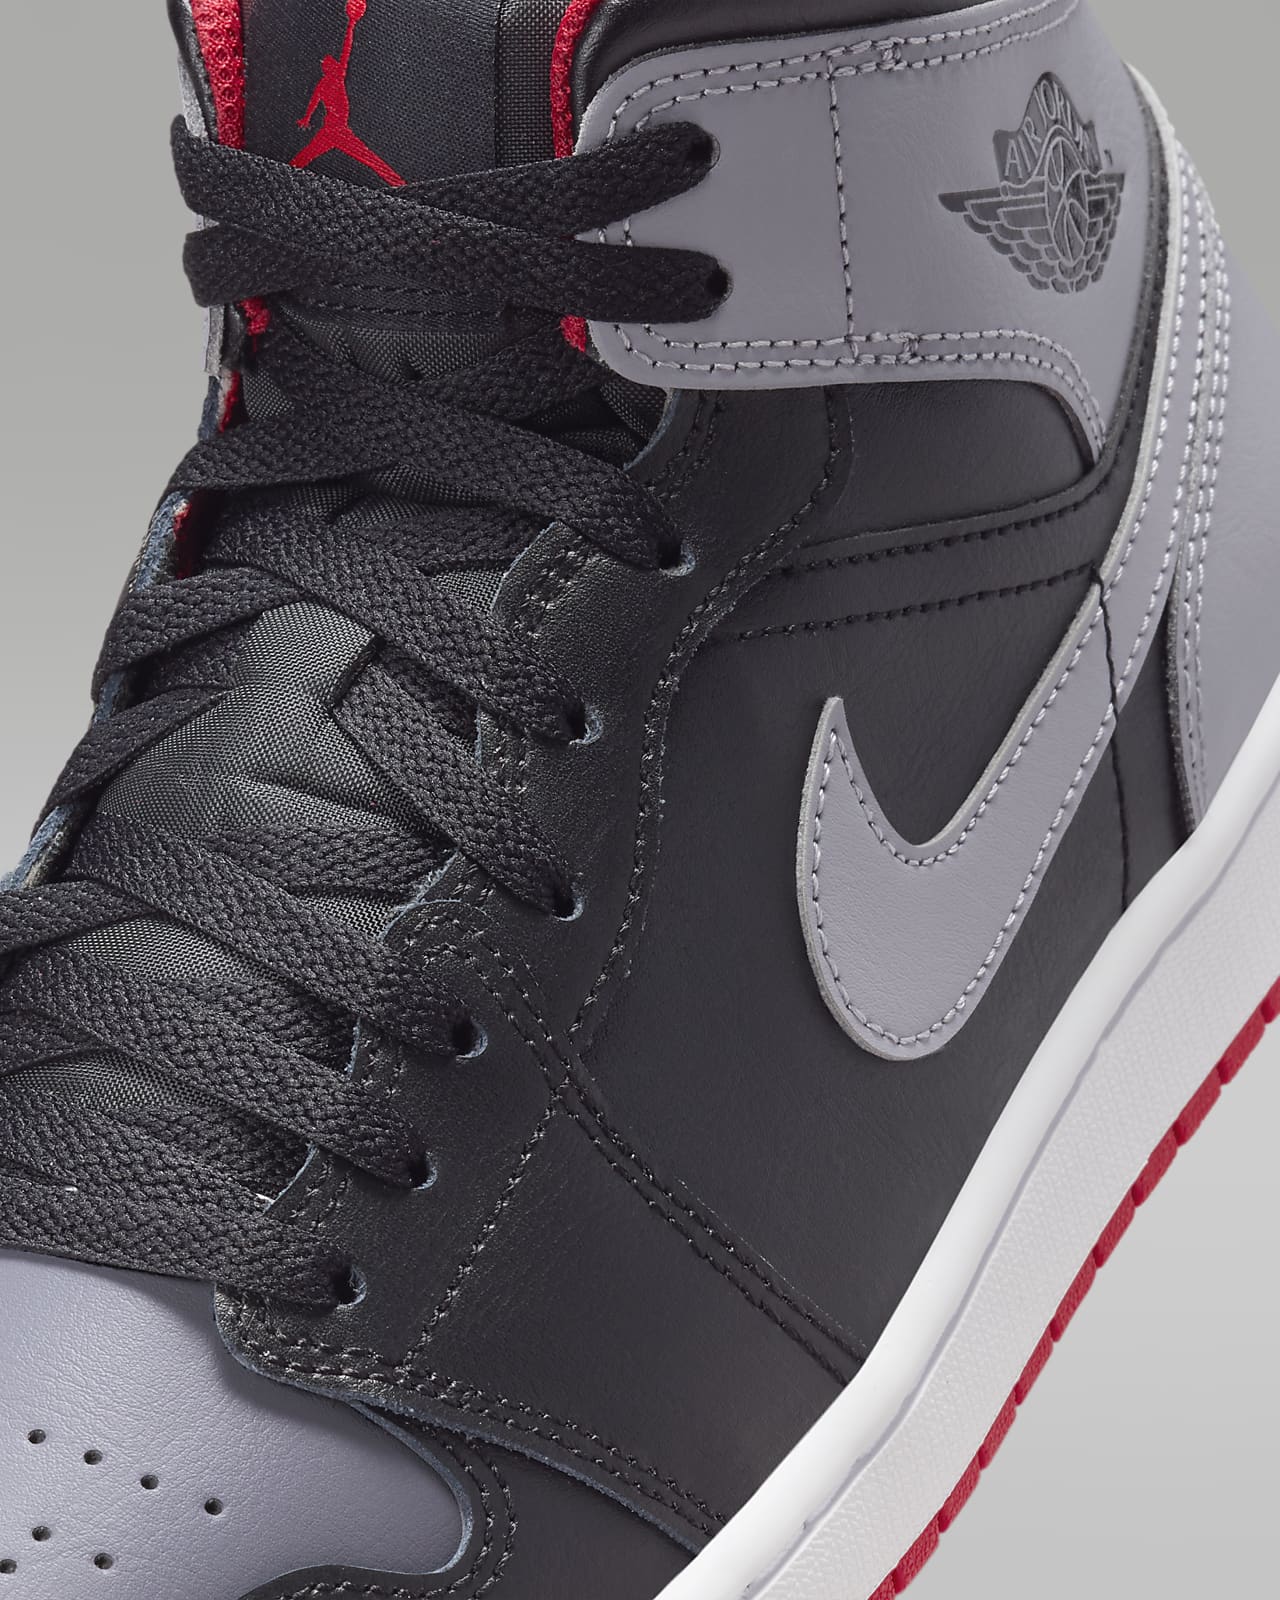 Air Jordan 1 Mids Have a New Colorway for Your Collection - Men's